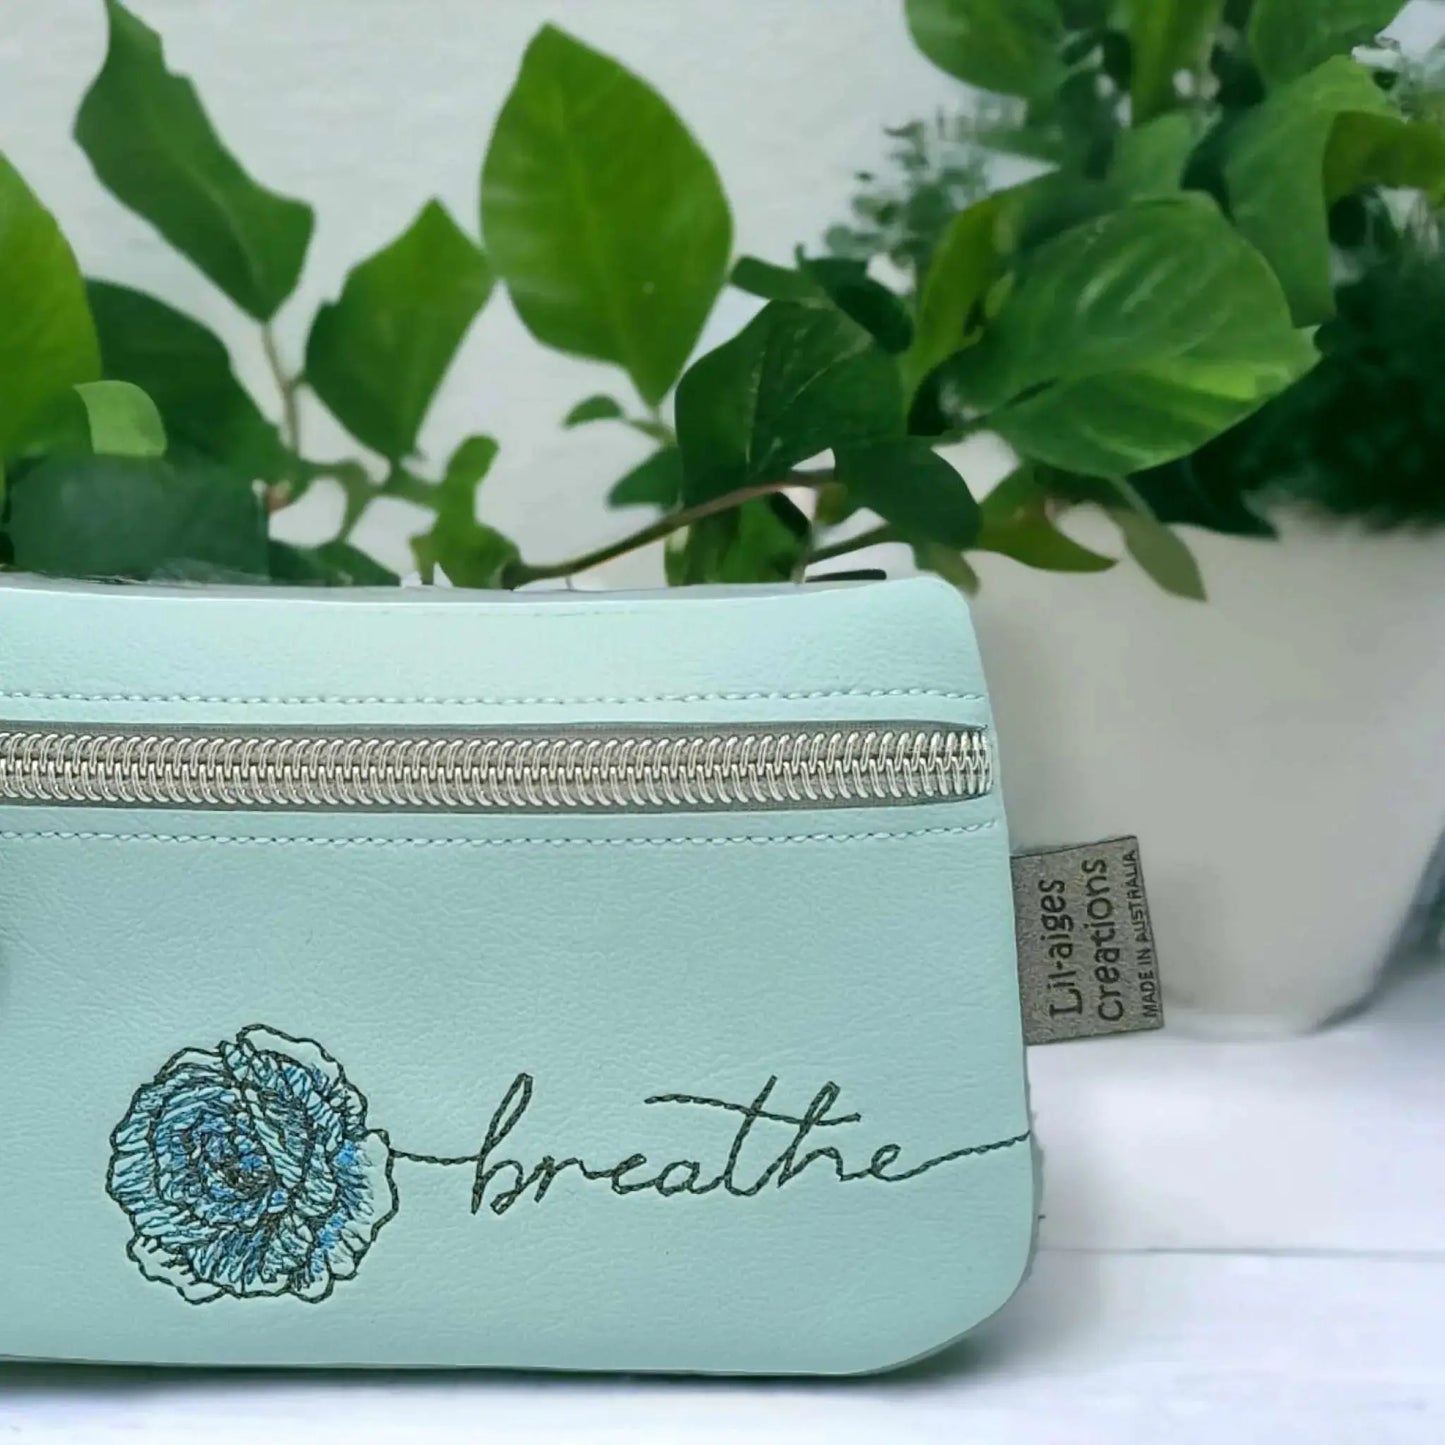 Breathe in Style: Light Blue Zipper Coin Purse with Rose Design - Image #3